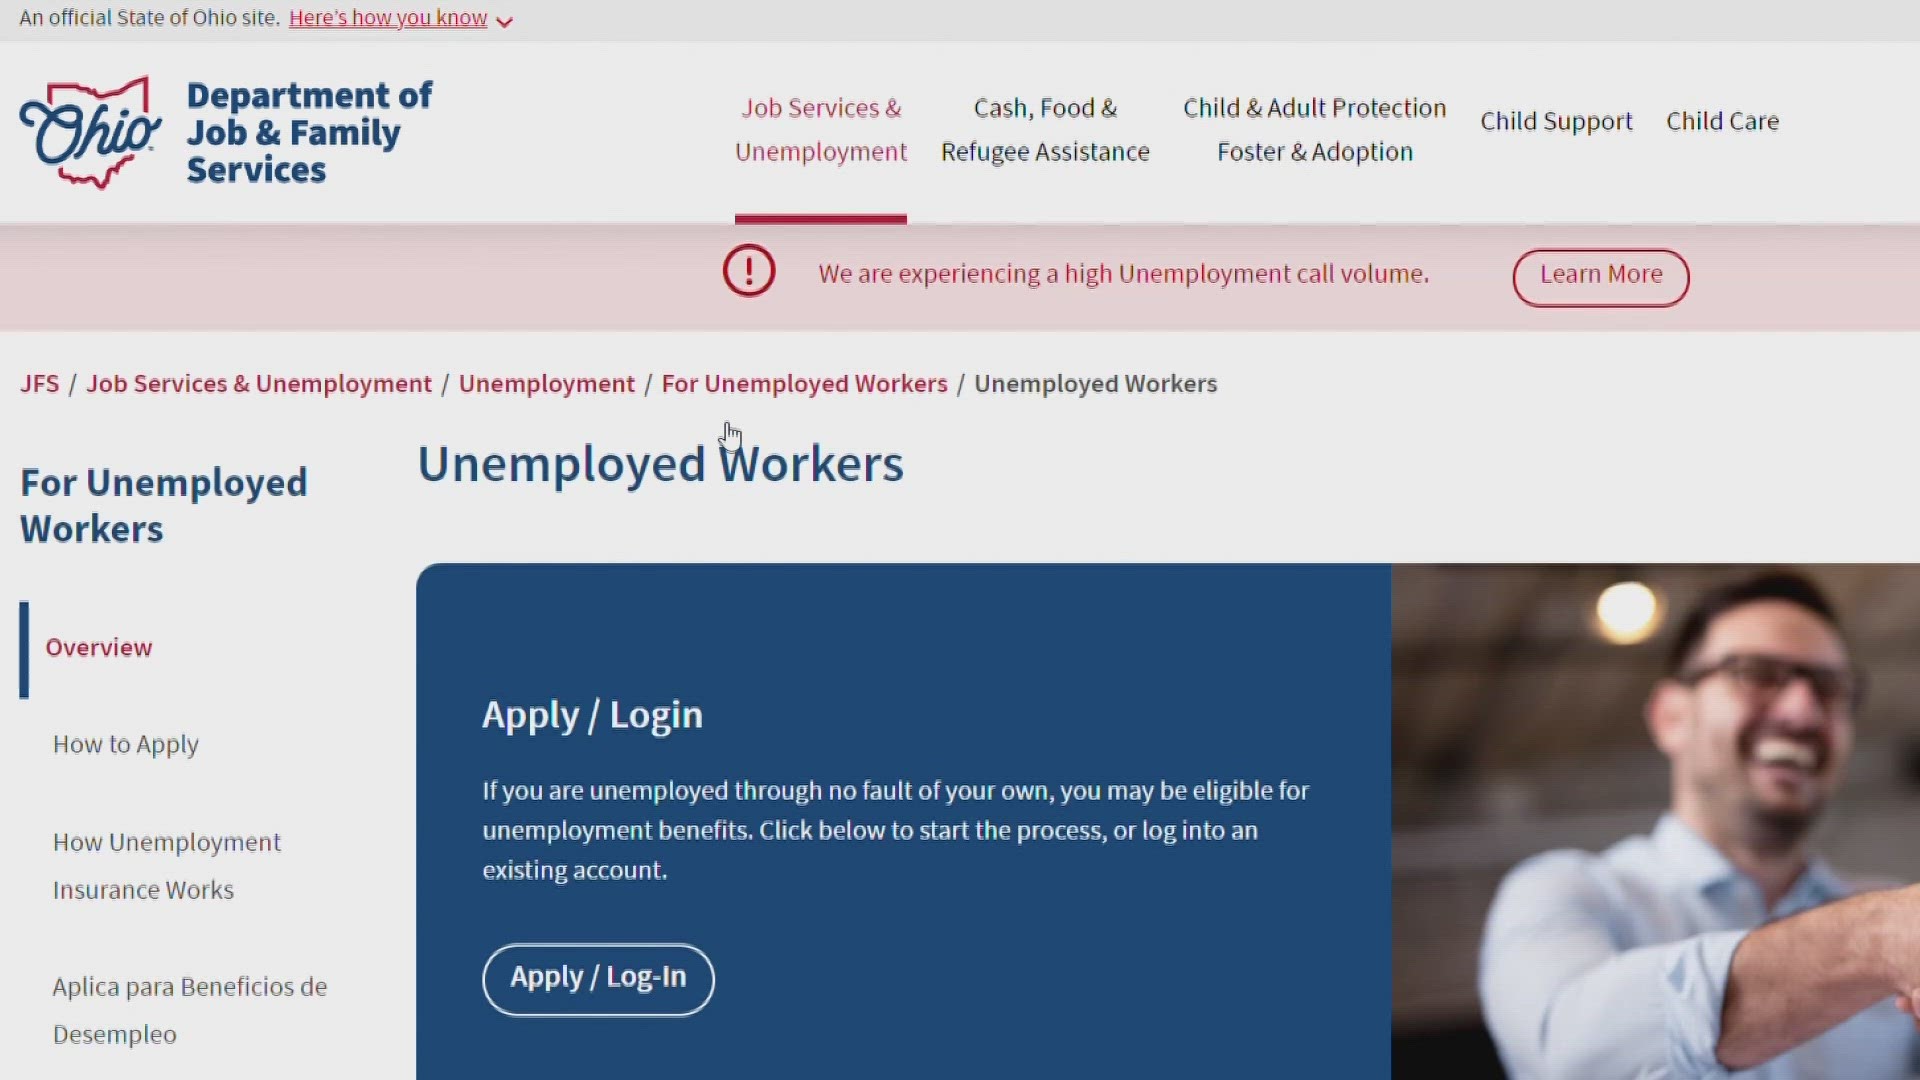 Ohio Department of Job and Family Services confirmed there has been an increase in the number of attempts to fraudulently access the state's unemployment system.